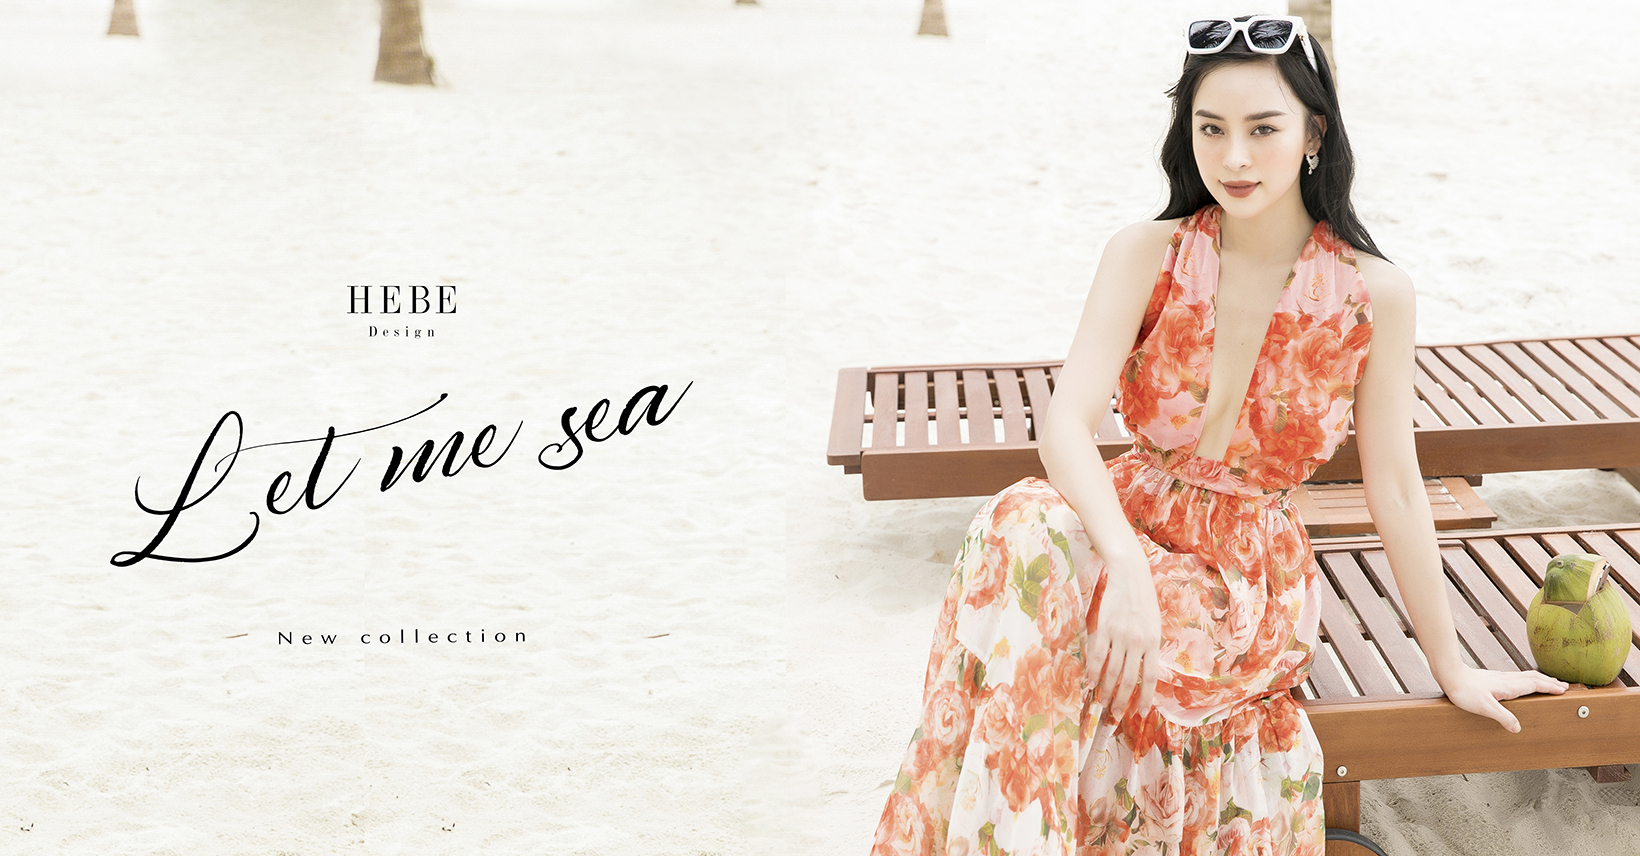 HEBE NEW COLLECTION "LEST ME SEA 20' " SUMMER 2020.